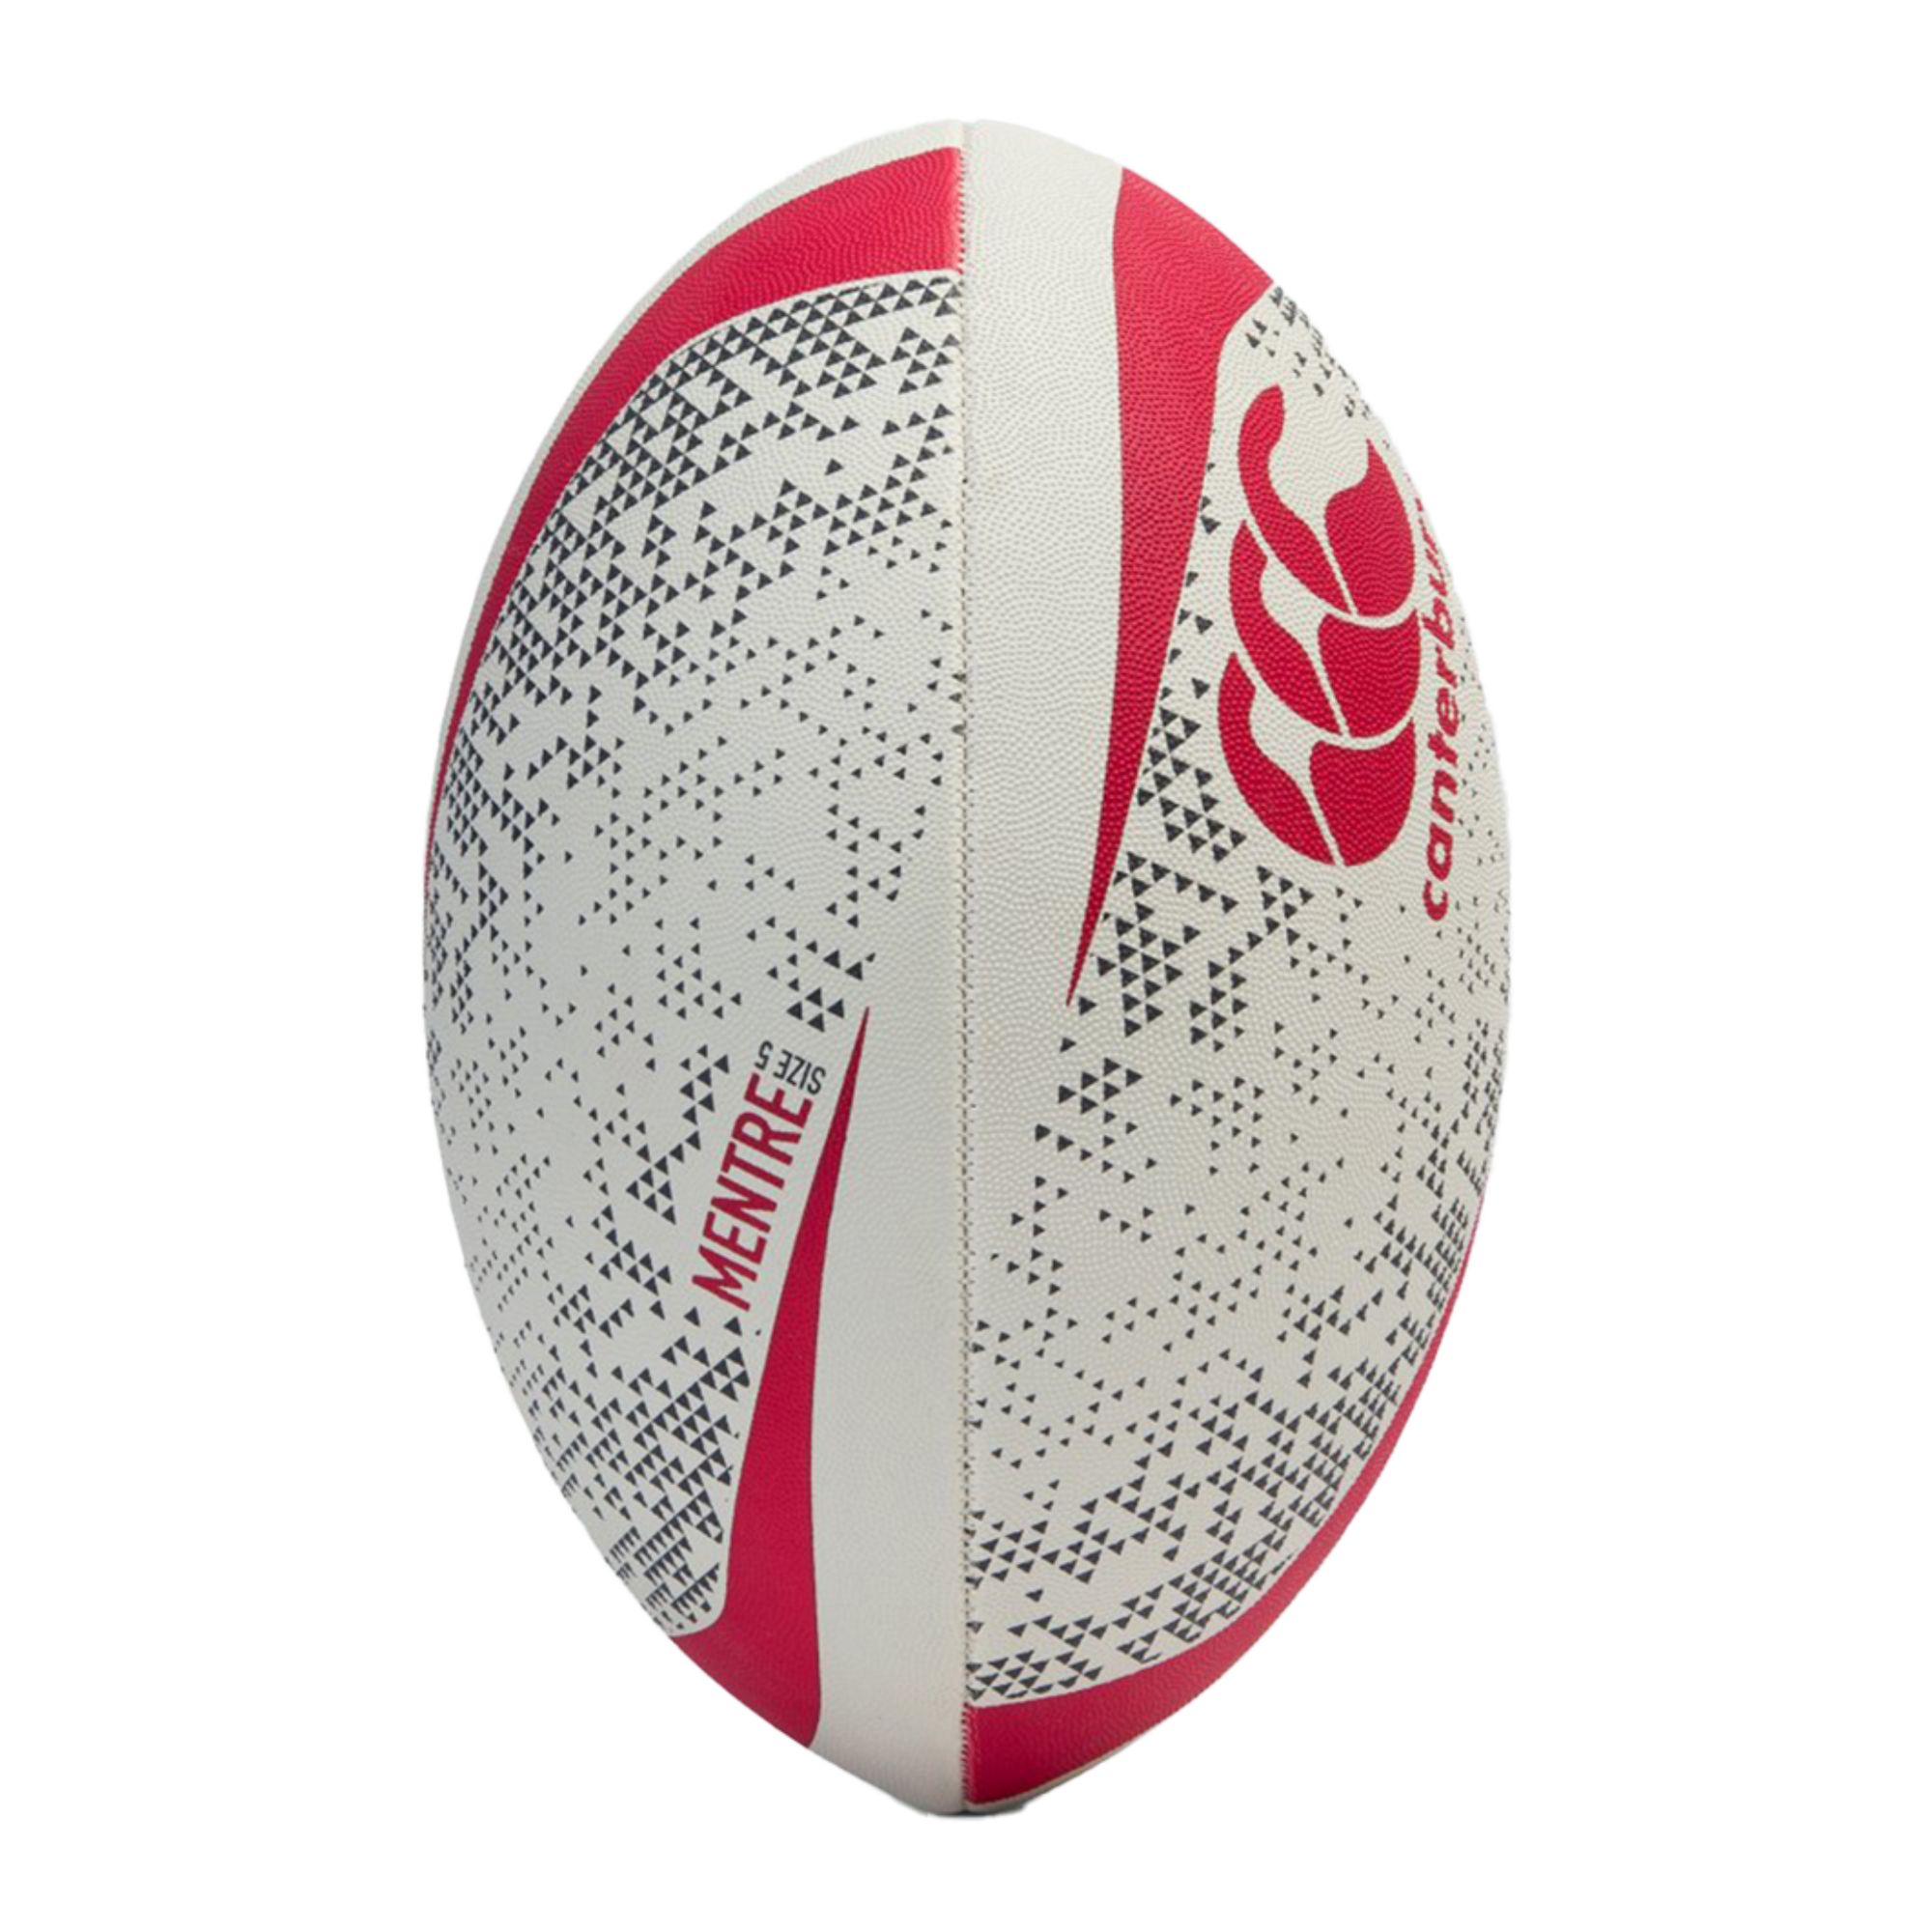 Canterbury CCC Mentre Rugby Training Ball - Available Sizes 3, 4, 5 -White/Red/Grey